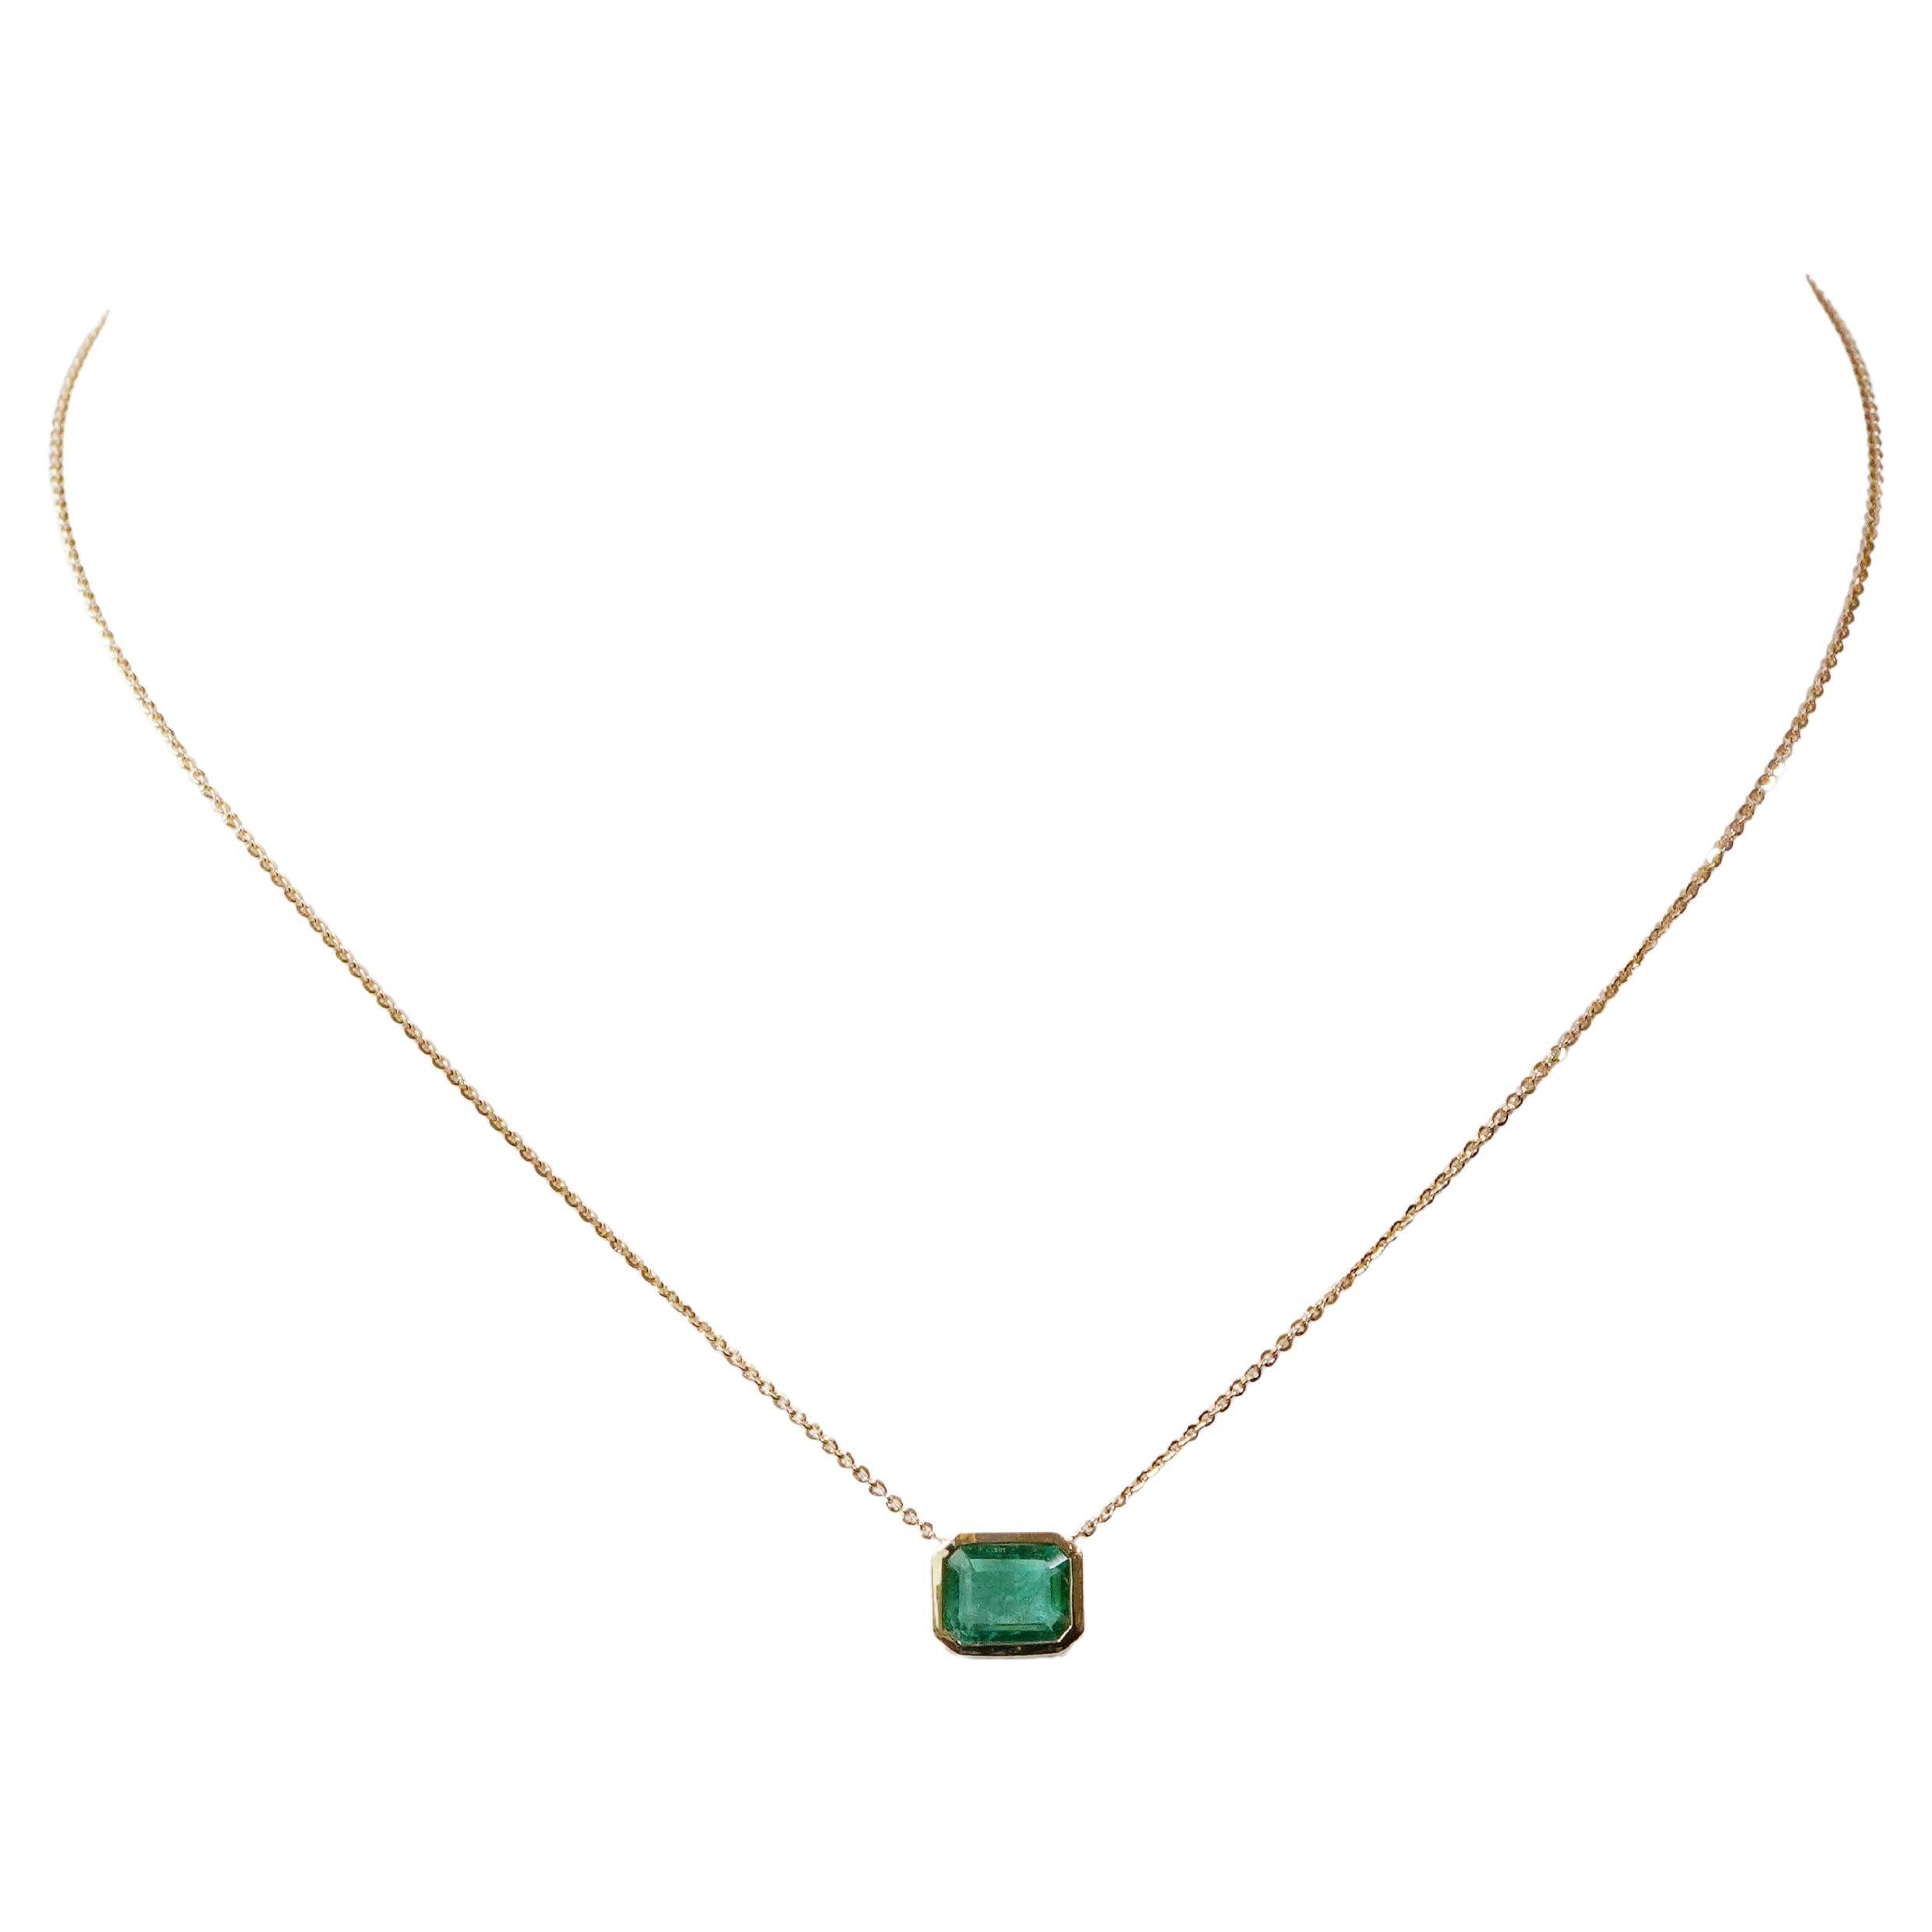 18K Yellow Gold Necklace With Emerald 1.59 ct. For Sale